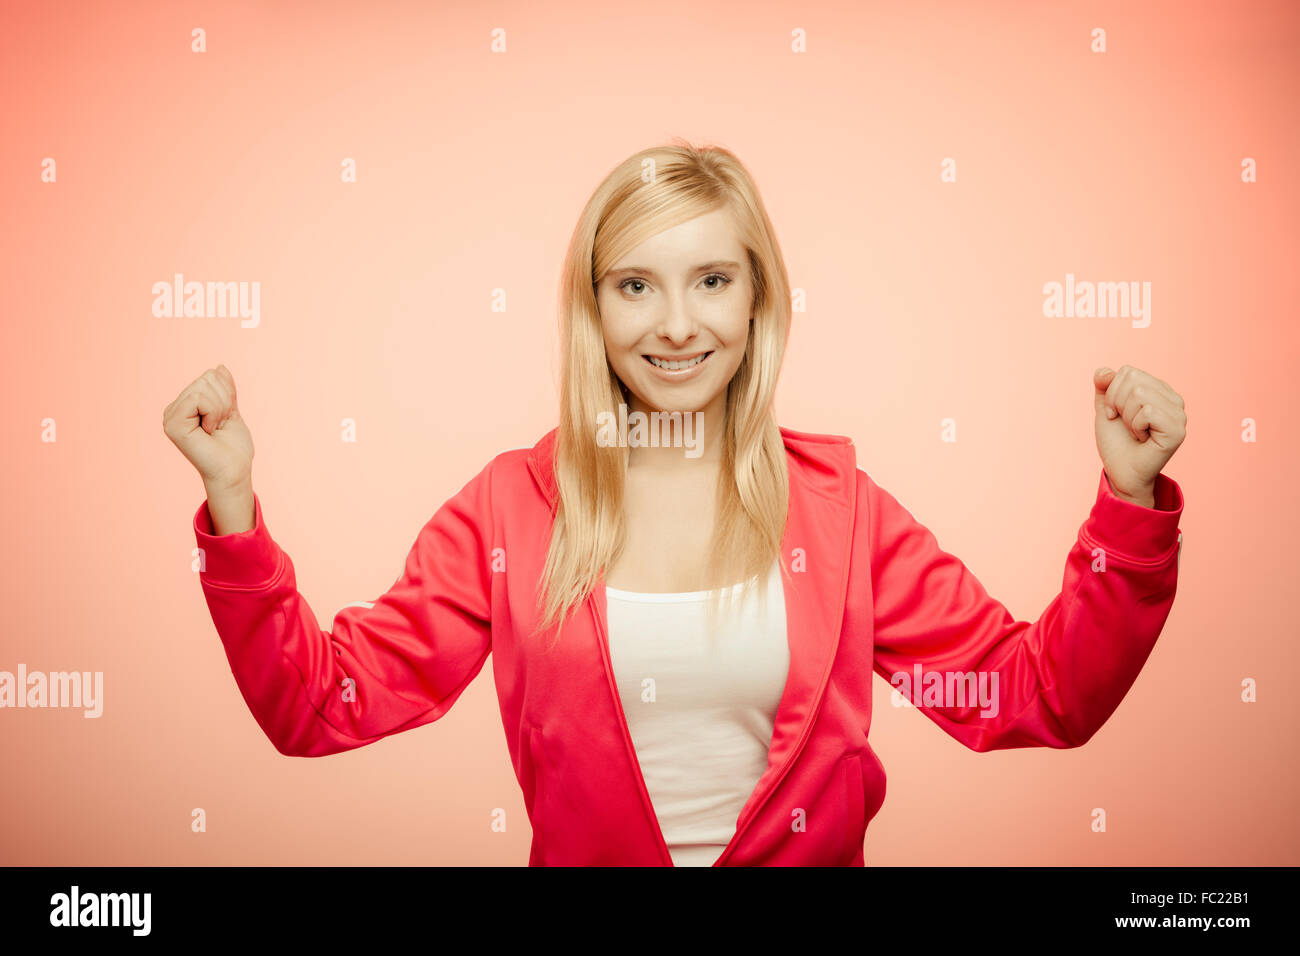 Fitness woman showing fresh energy flexing biceps muscles Stock Photo